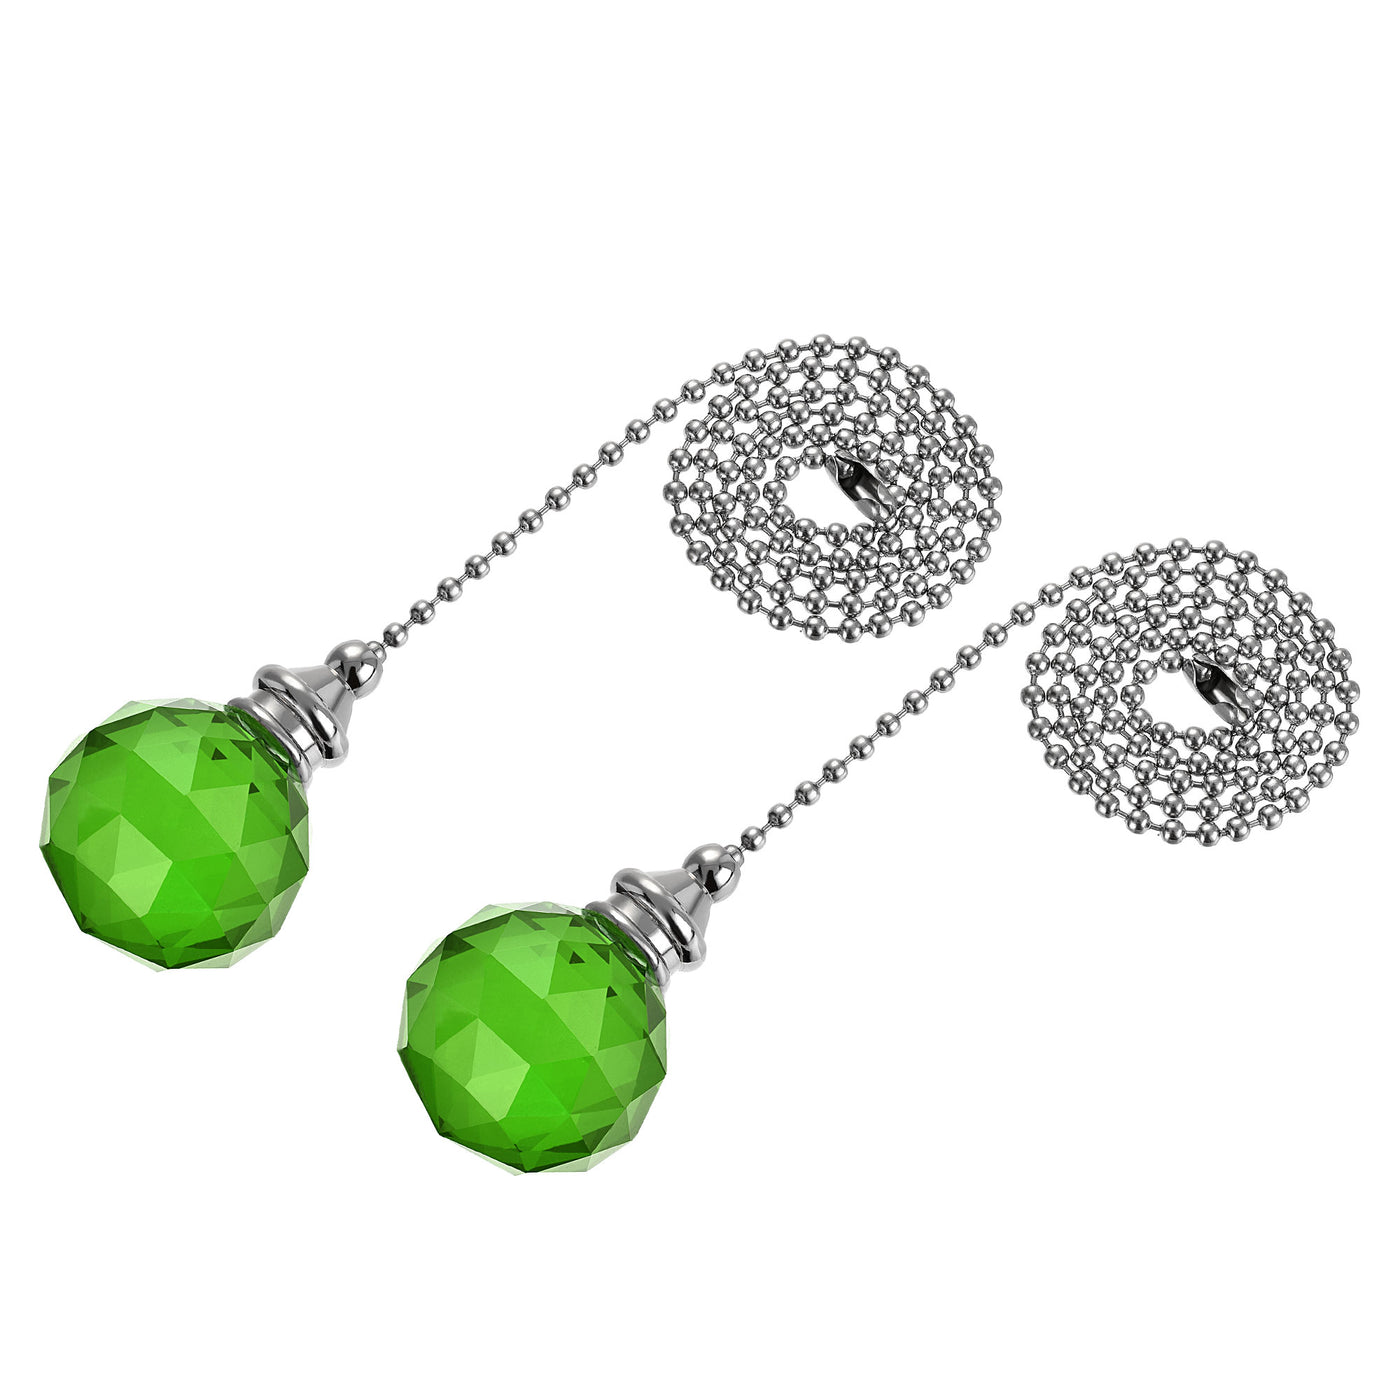 uxcell Uxcell Ceiling Fan Pull Chain, 20 Inch Nickel Finish Chain Ornament Extension, 30mm Green Crystal Ball Pendant 2Pcs